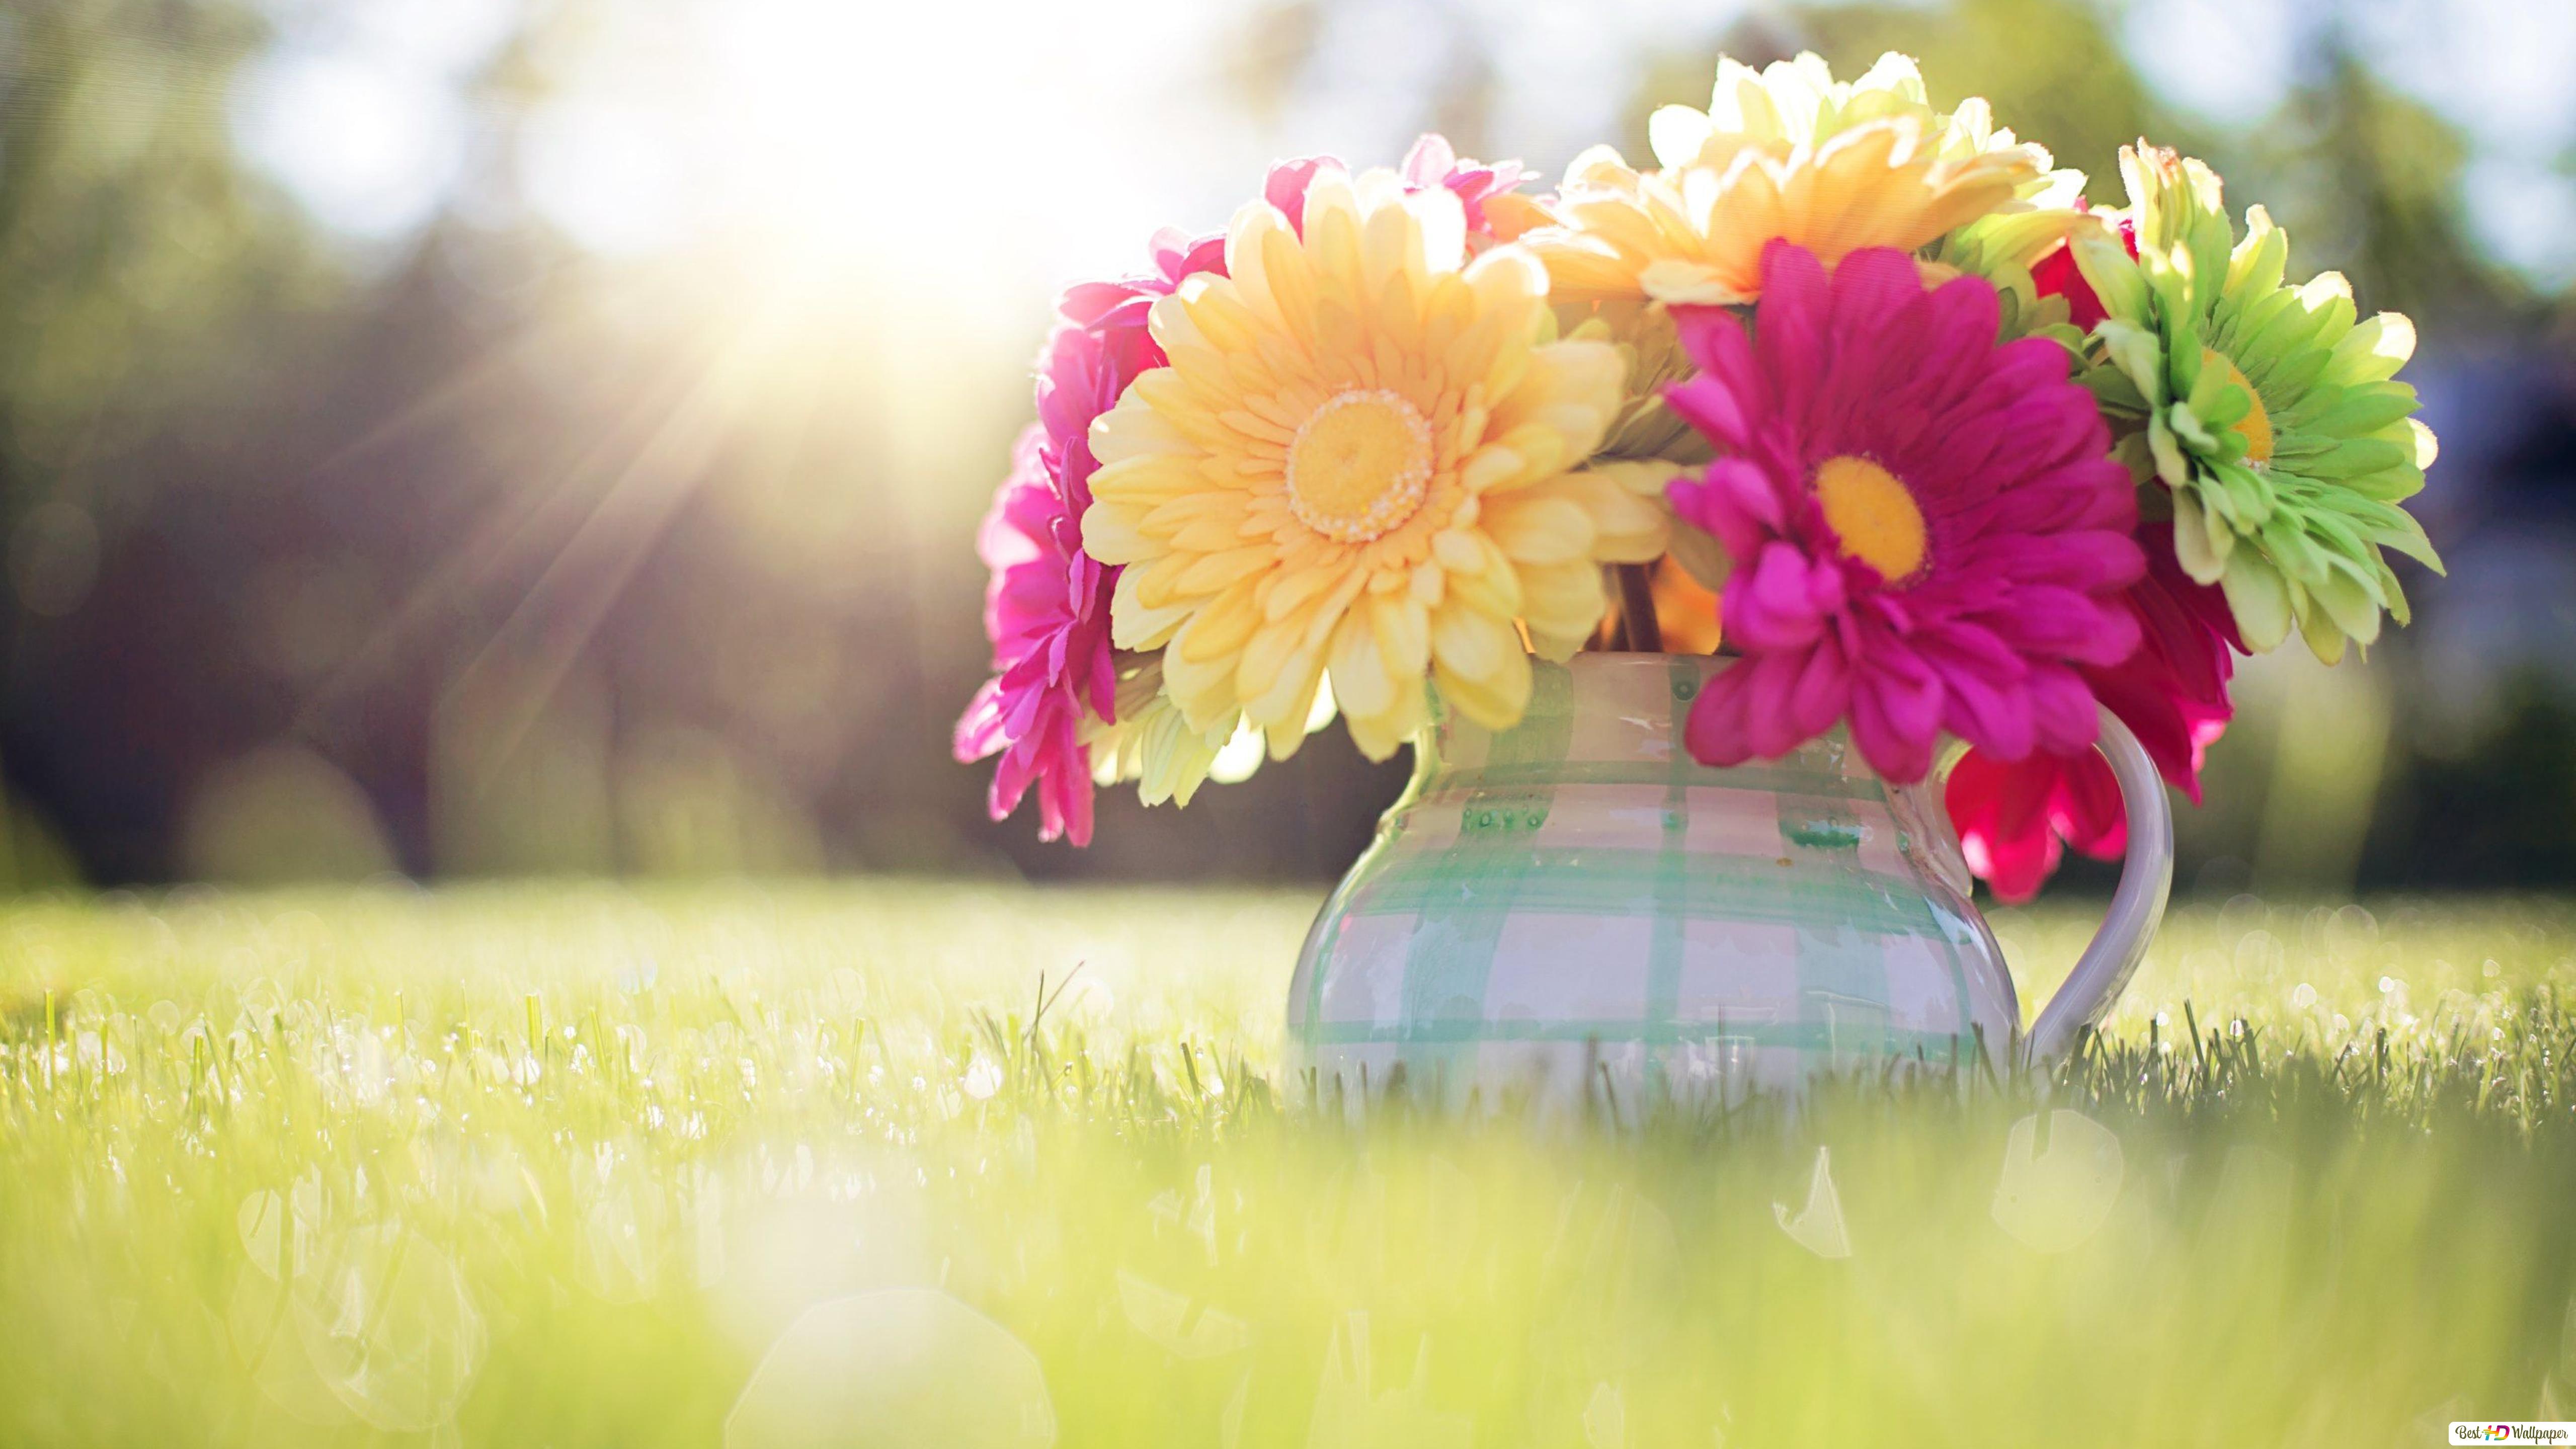 Flowers in pots on the lawn in spring HD wallpaper download